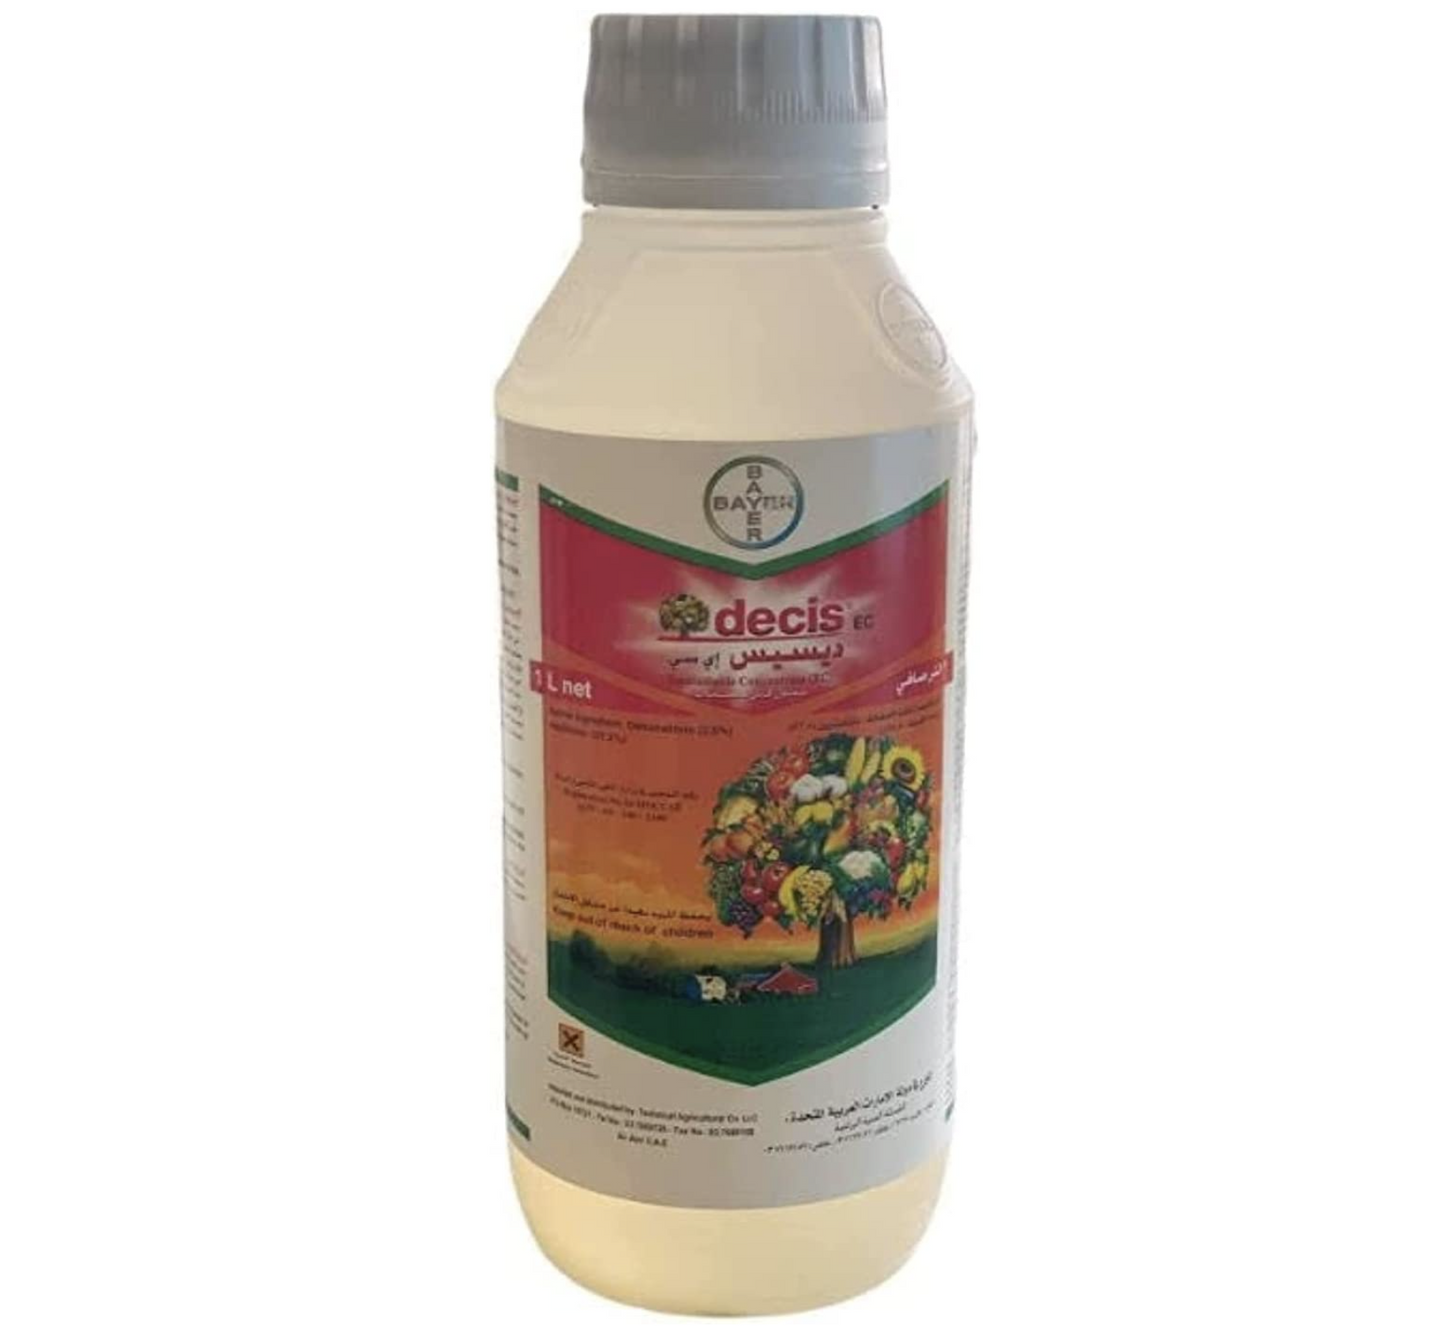 Decis® EC "Agriculture Insecticide by BAYAR" 1Ltr